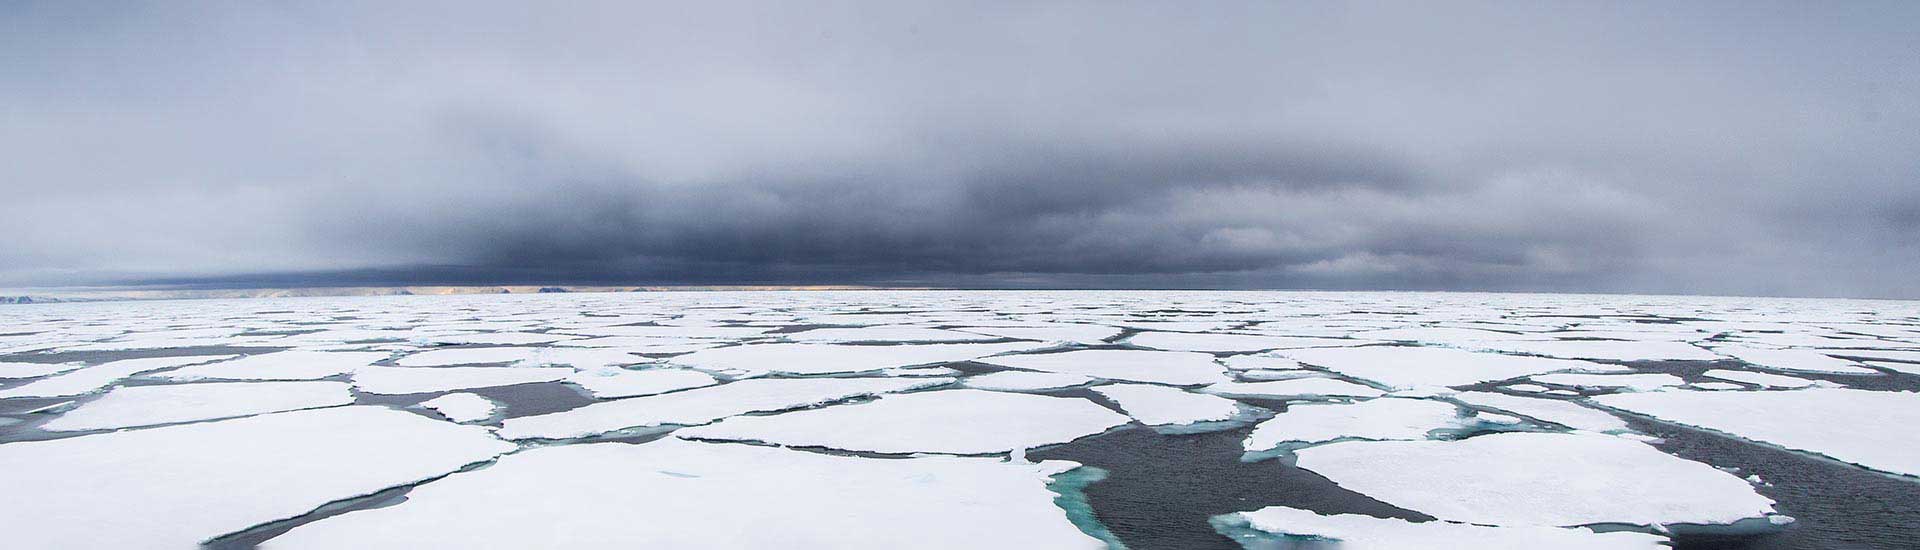 Photo: Sea with ice on top of it in the Artic.